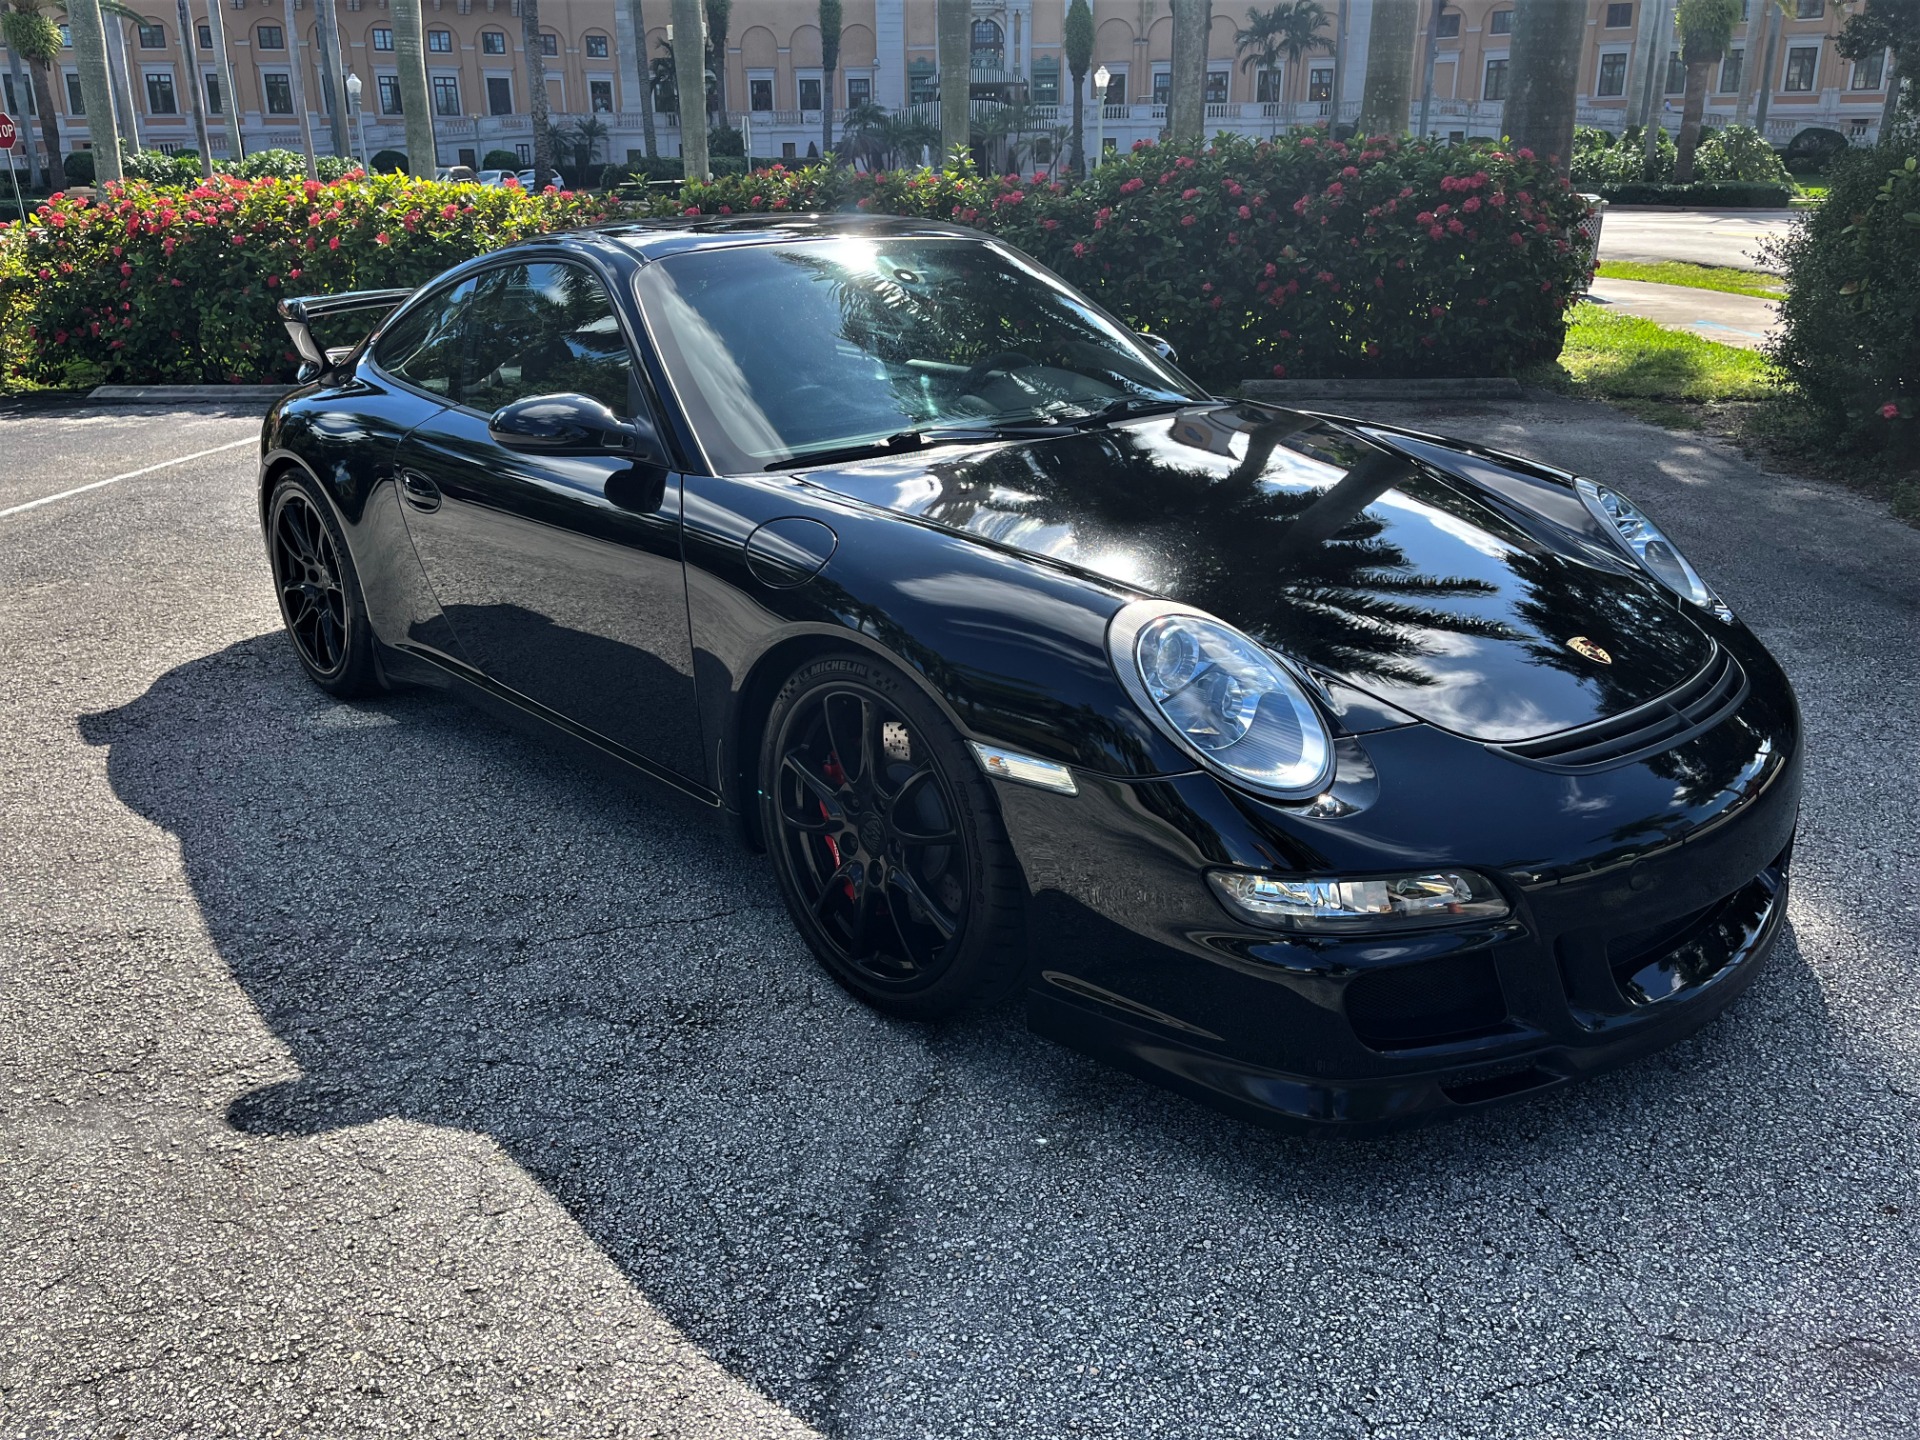 Used 2007 Porsche 911 GT3 for sale Sold at The Gables Sports Cars in Miami FL 33146 2